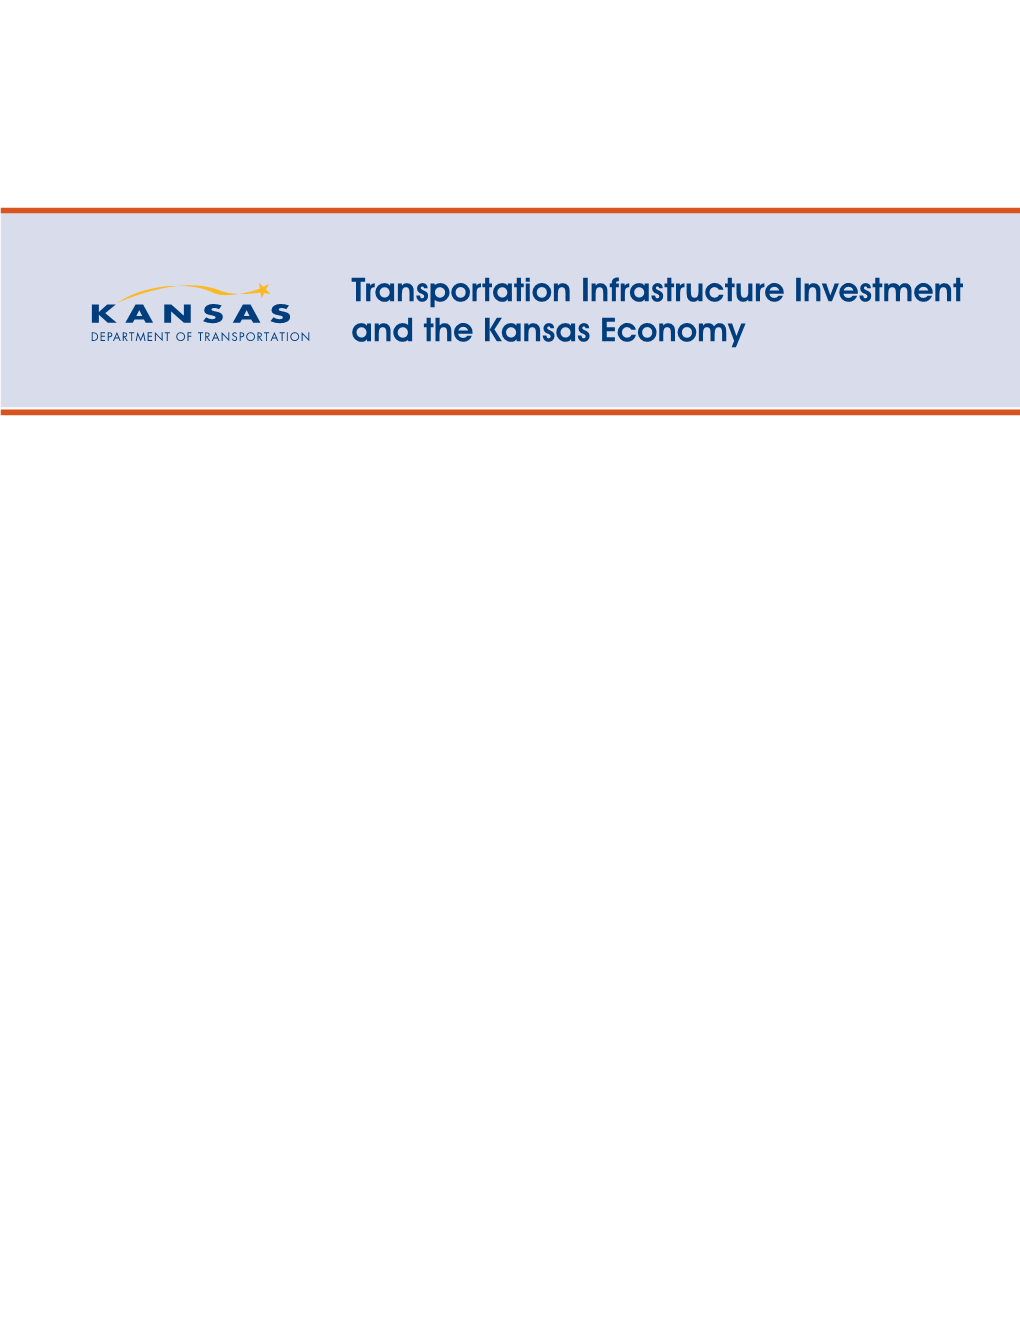 Transportation Infrastructure Investments and the Kansas Economy